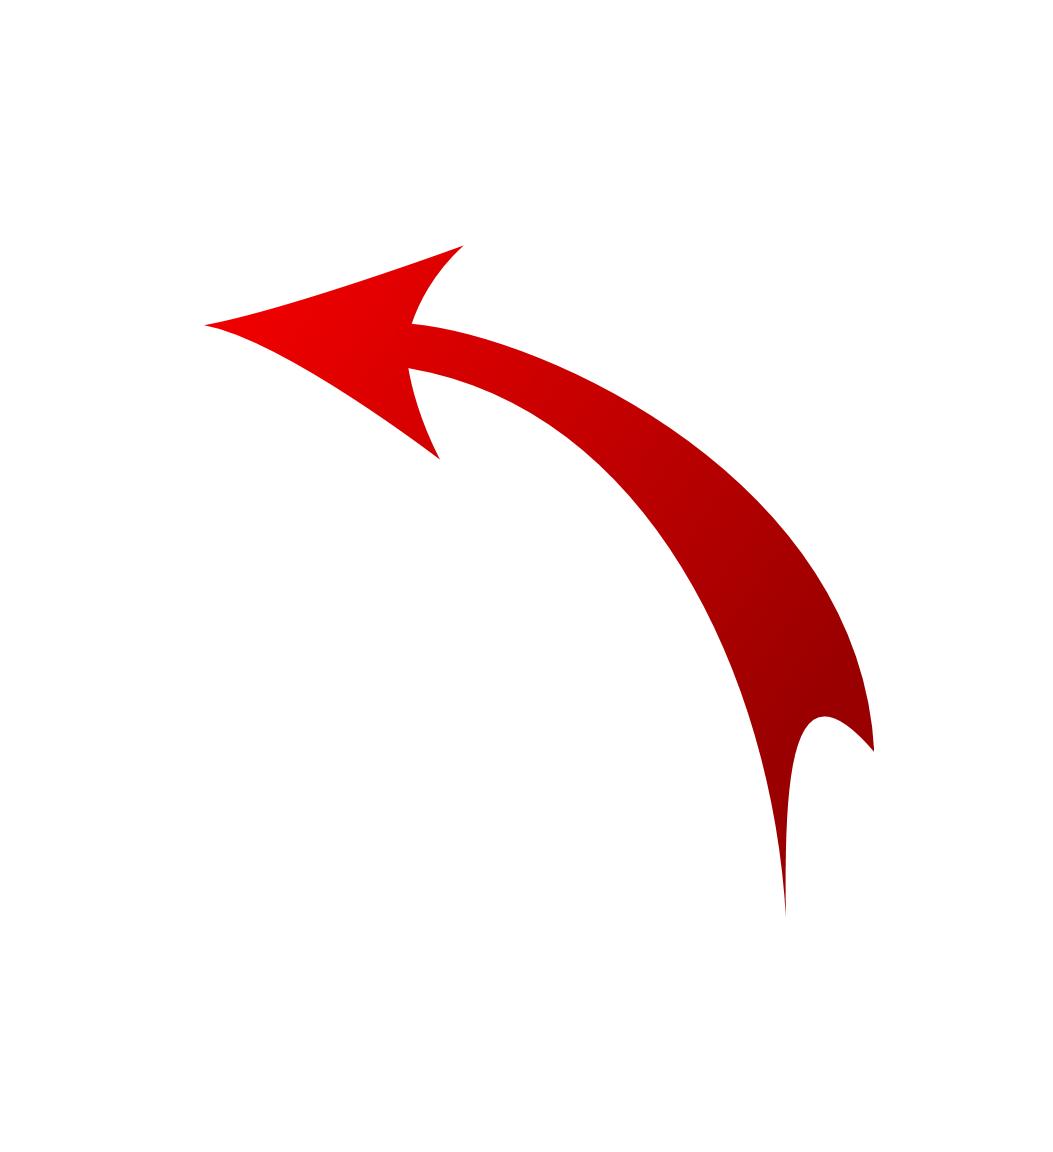 Images > Red Arrow Down Png - Cliparts.co